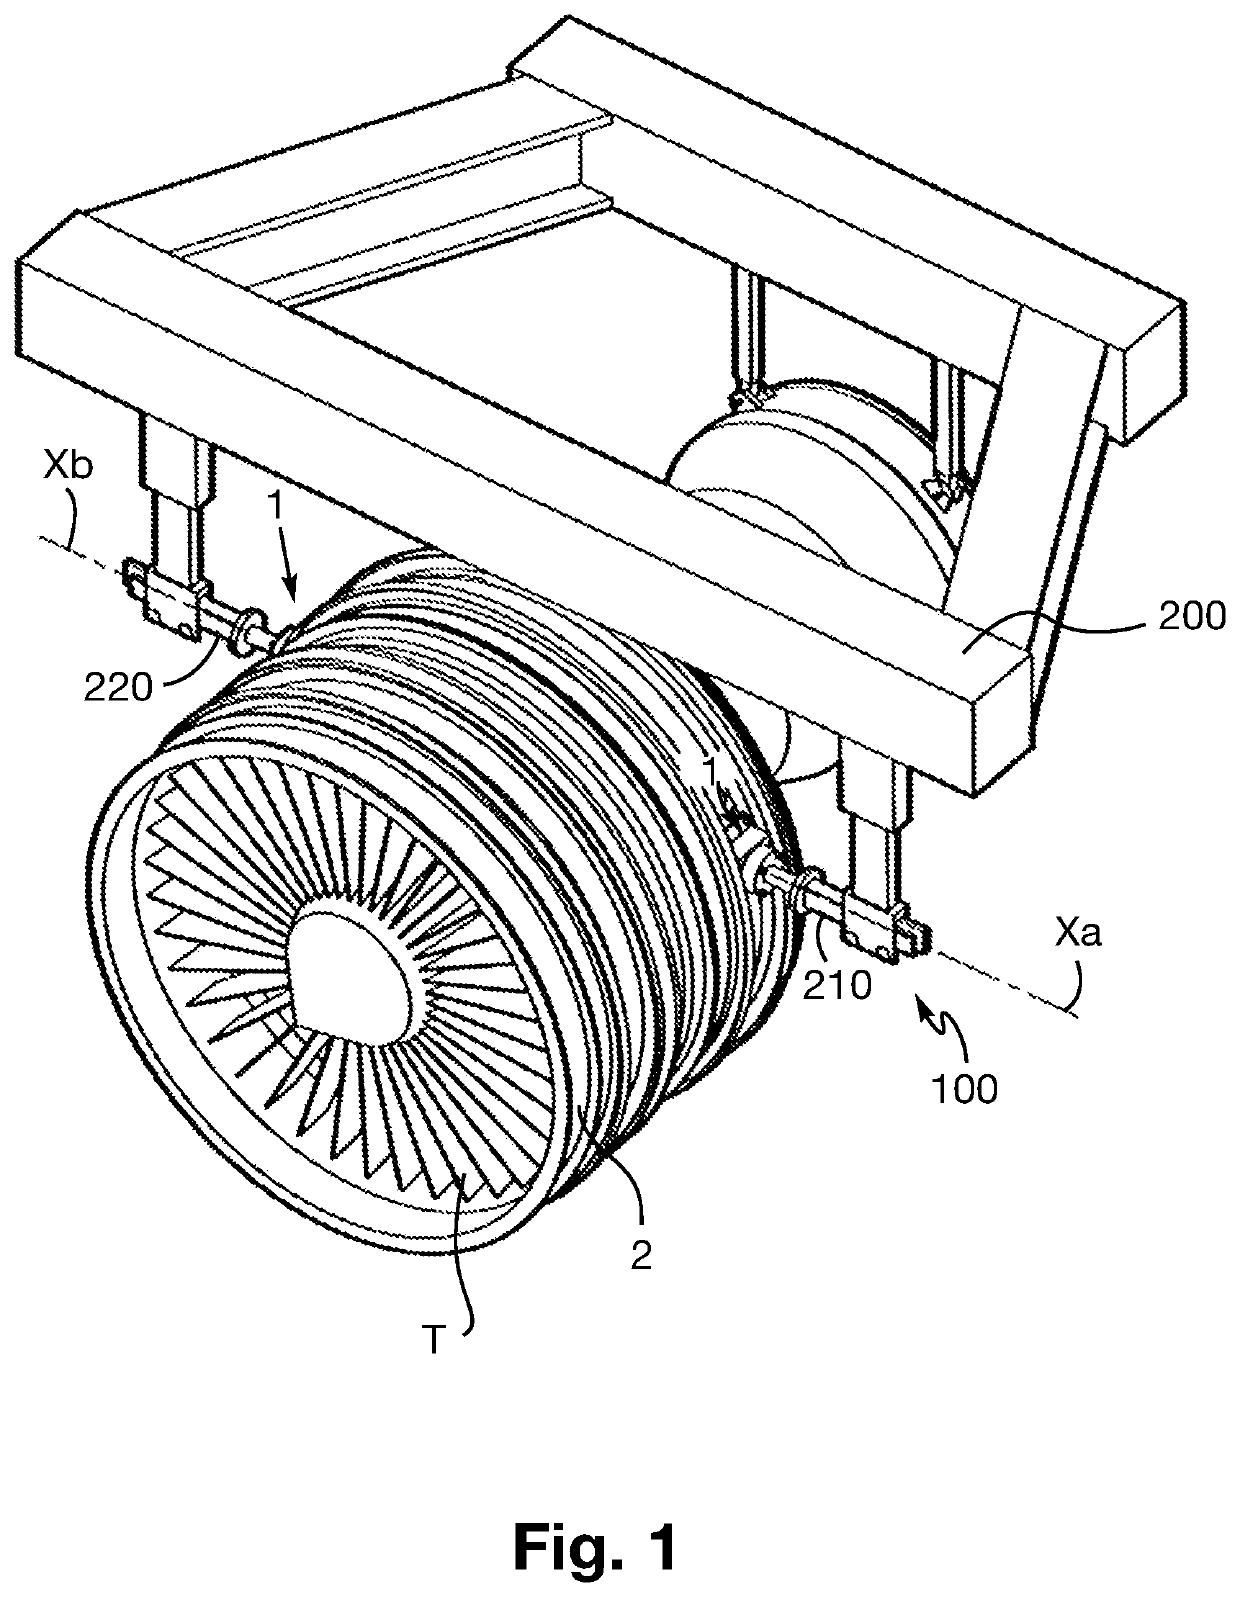 Removable support interface for an annular turbomachine casing